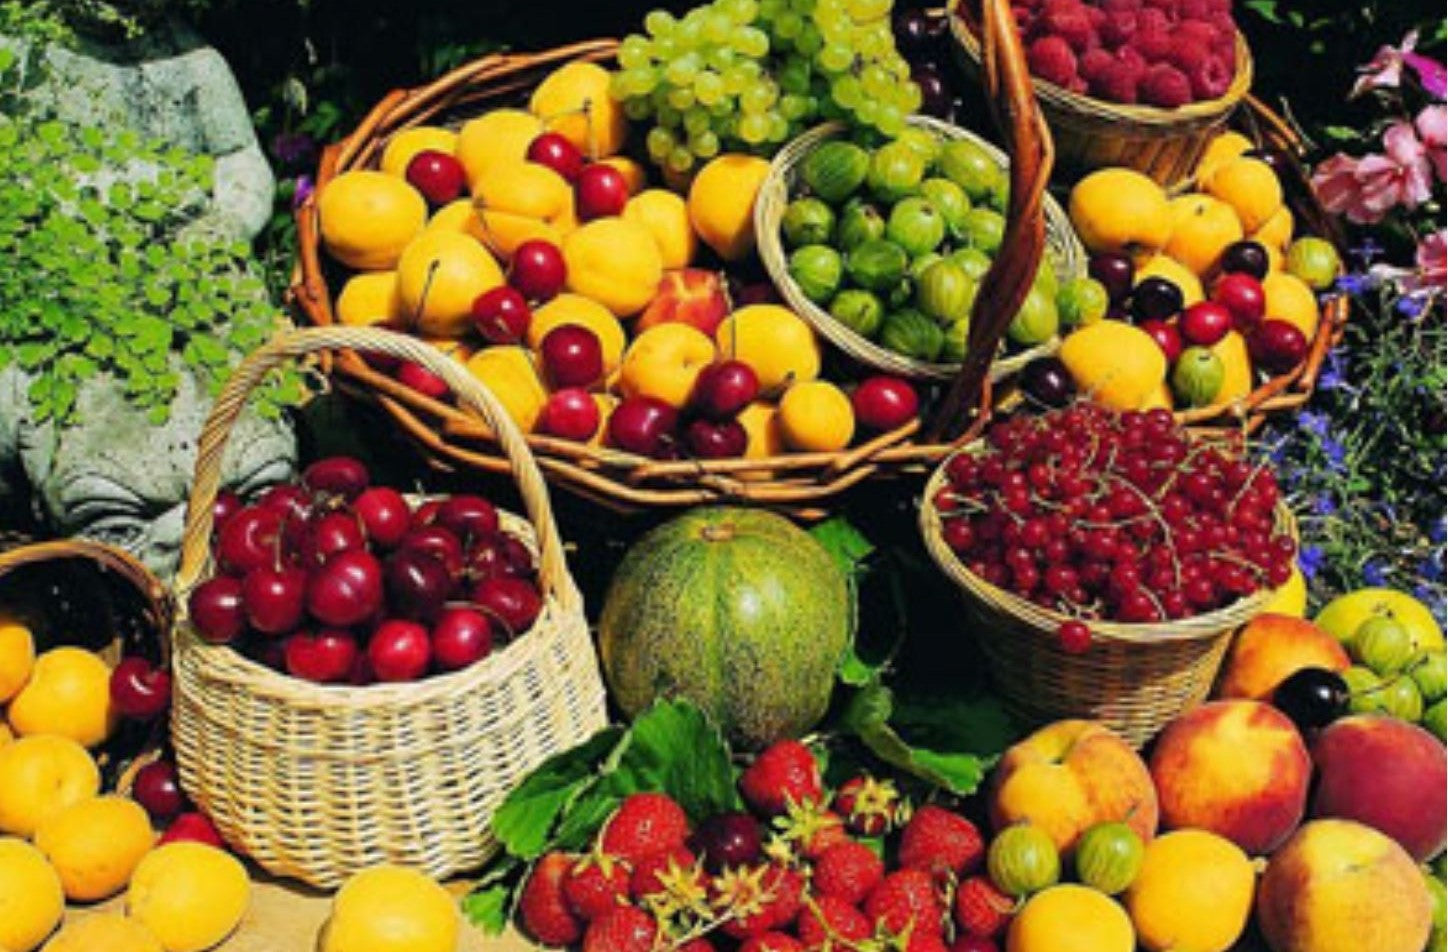 Many baskets of fruit are sitting on the ground.